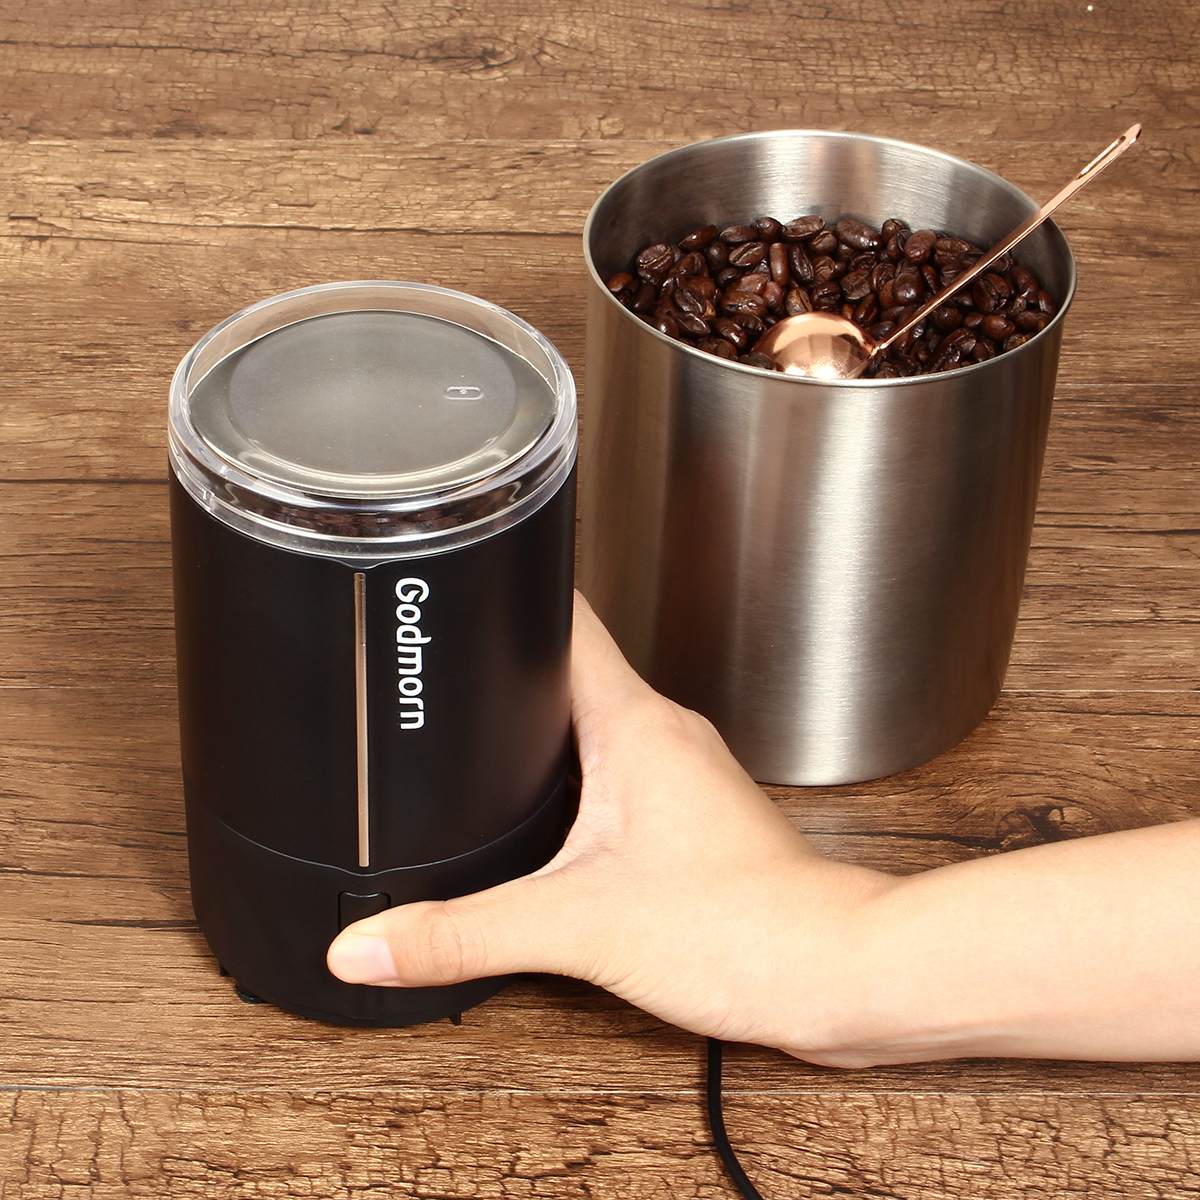 Electric Coffee Grinder Espresso Grinder One Touch Multi-function Bean Grinder Auto Shut Off & Overheating Protection 32